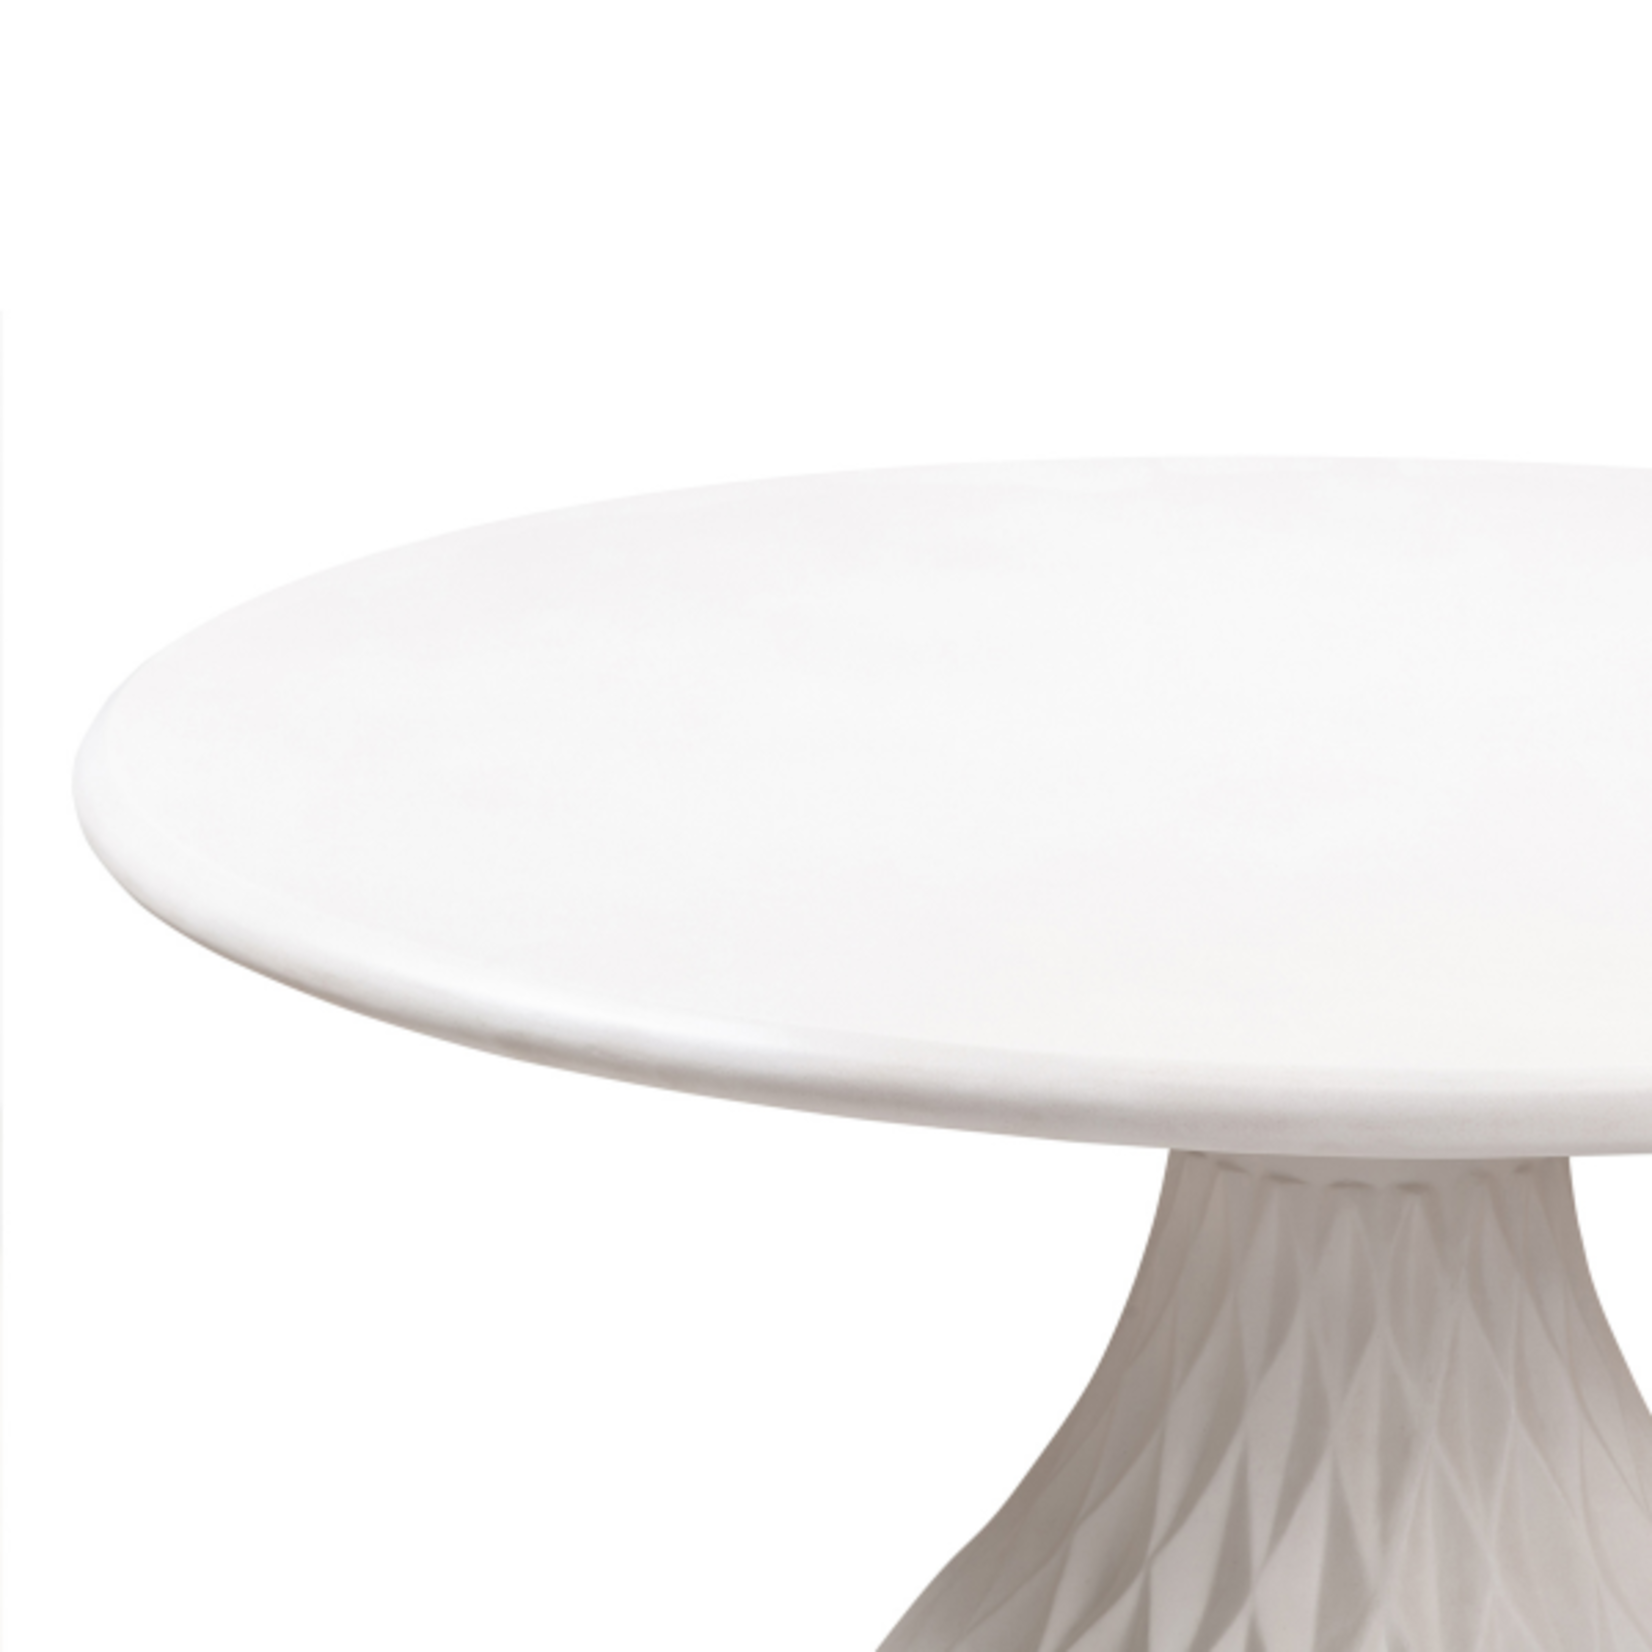 Tov TULLY IVORY CONCRETE DINING TABLE